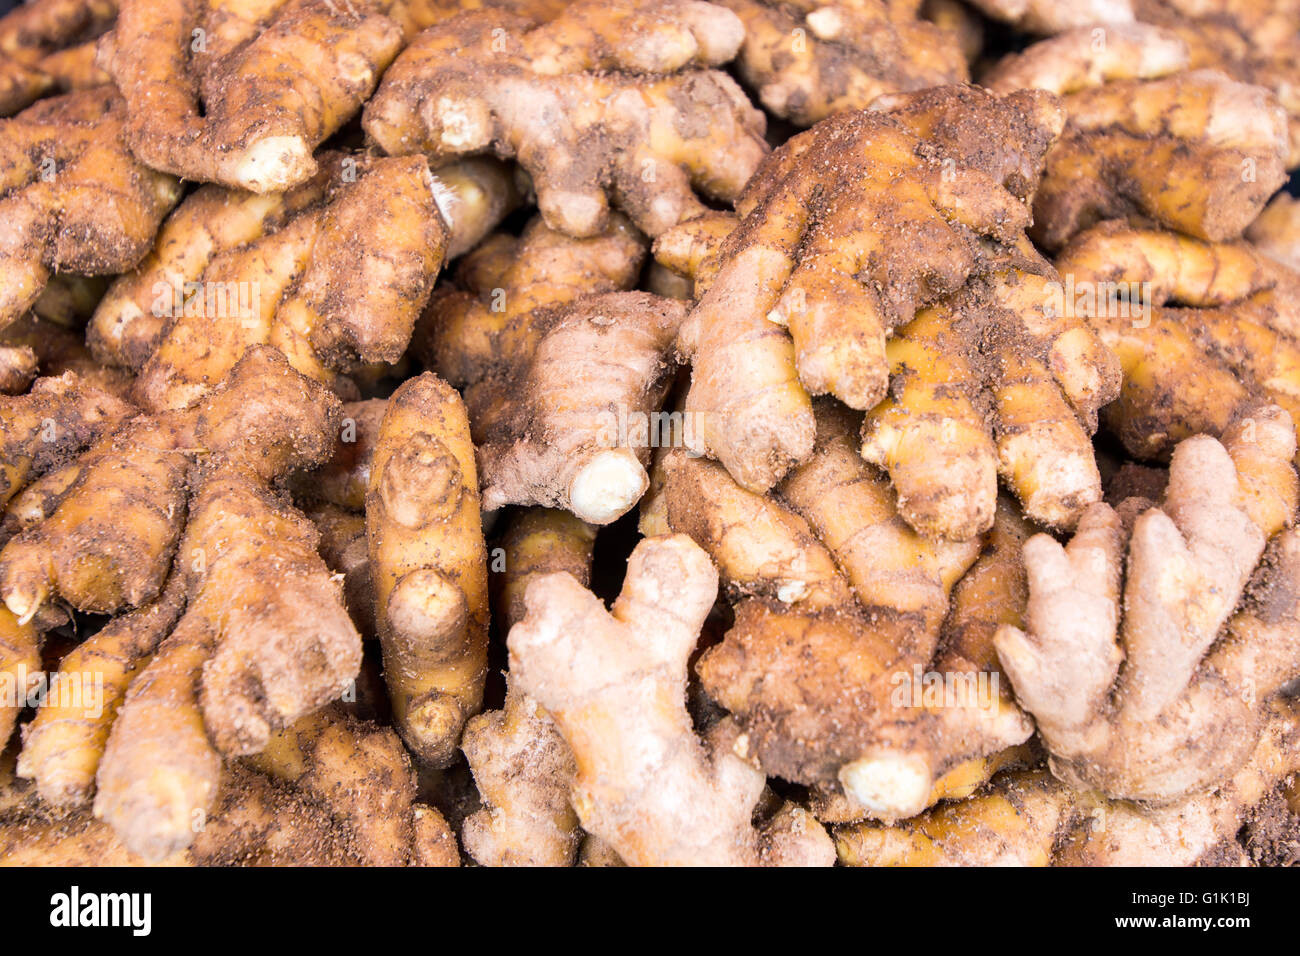 Large pile of fresh root ginger for sale at market Stock Photo